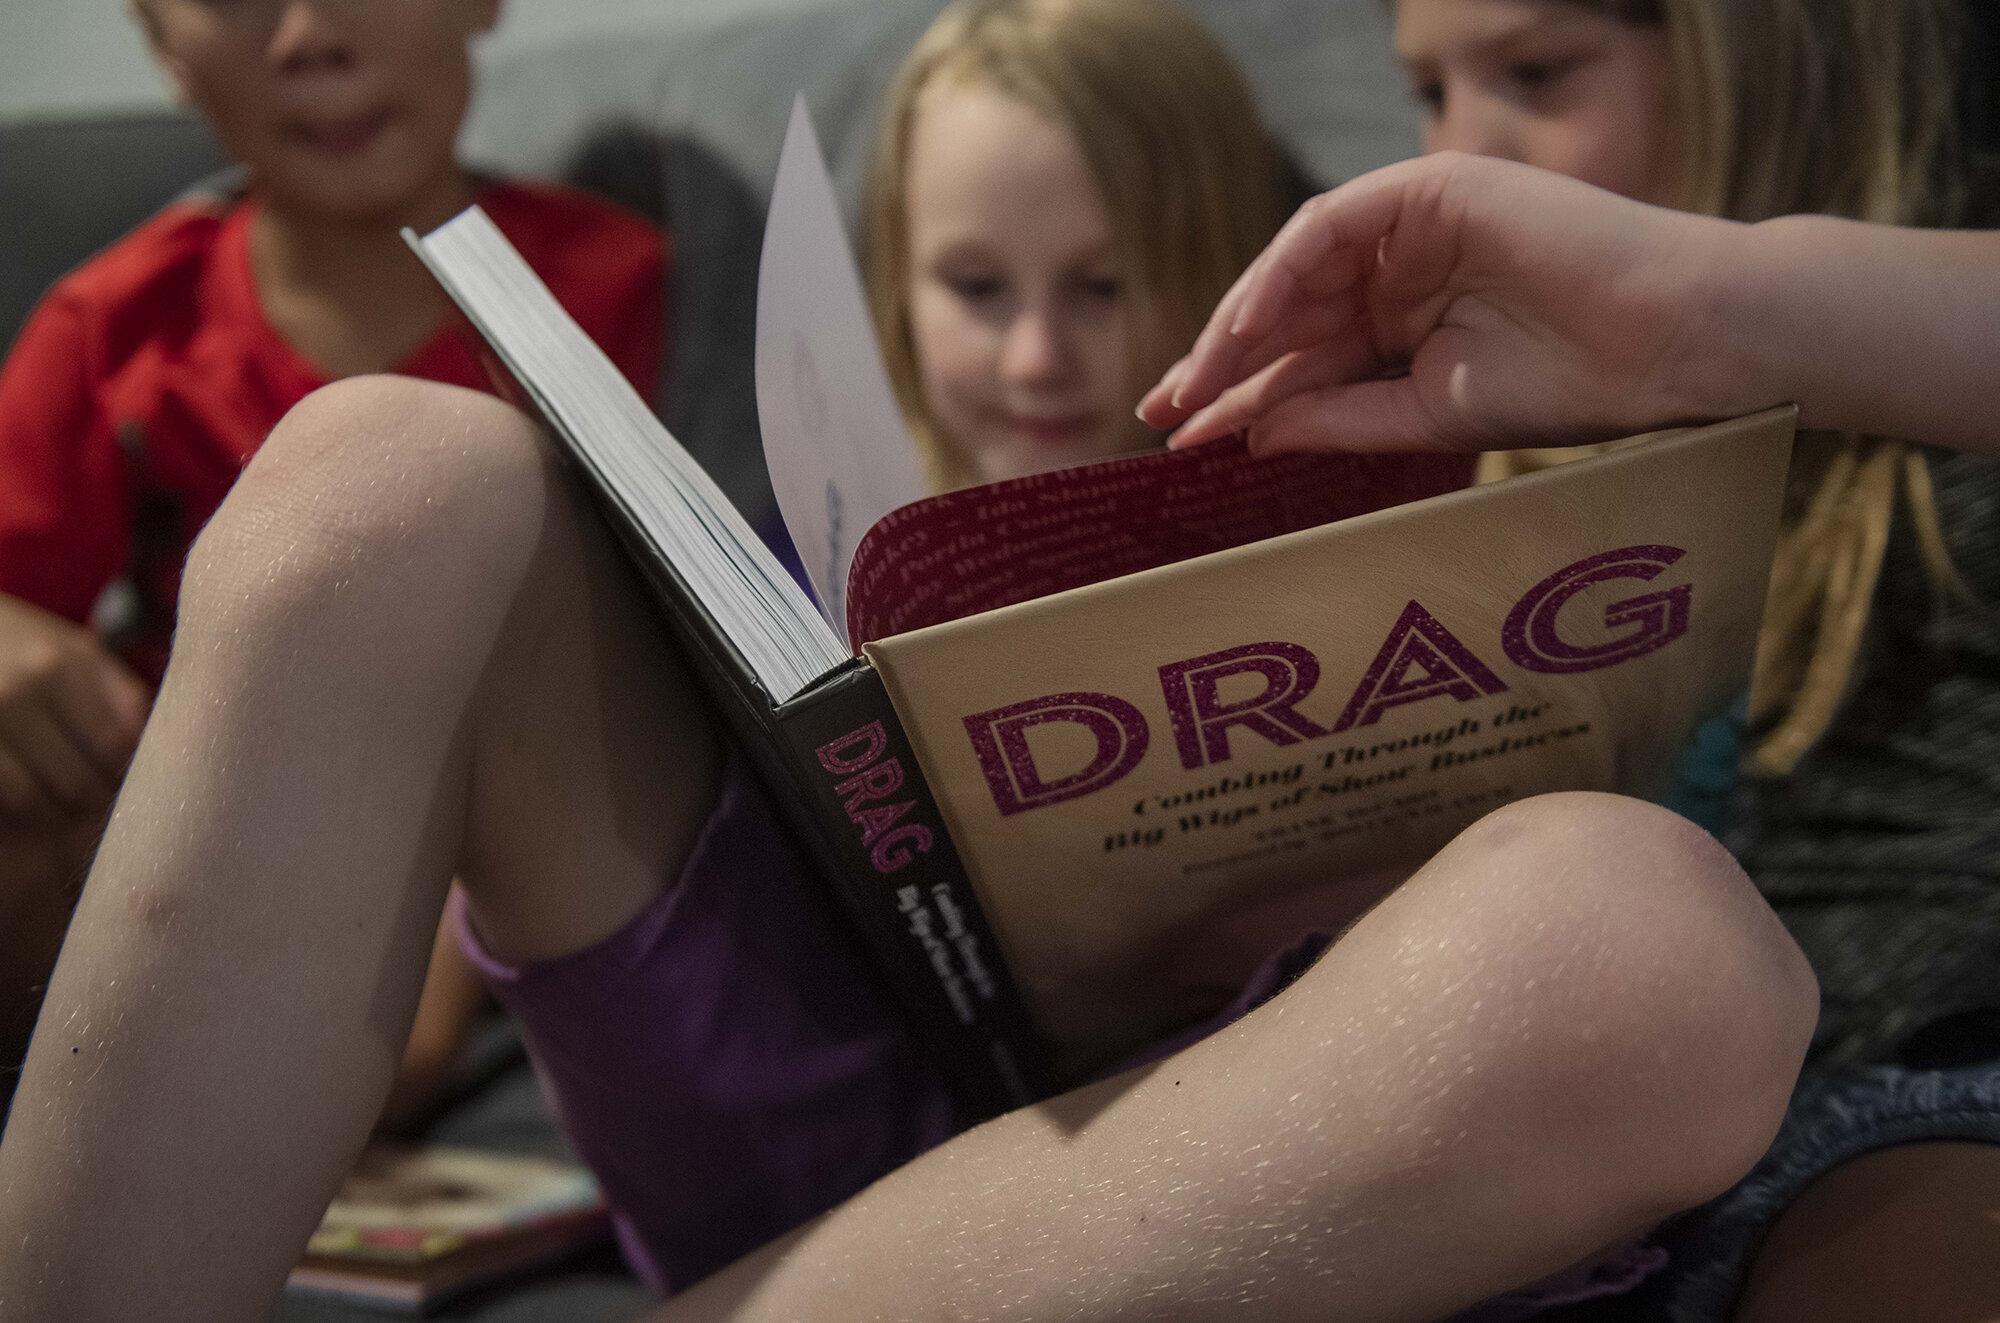  Keegan shows off his Drag book to slumber party guests at his 9th birthday party. "That's a boy and That's a boy, and that's a boy," he announced while explaining the book to friends. Picture taken in 2019. 